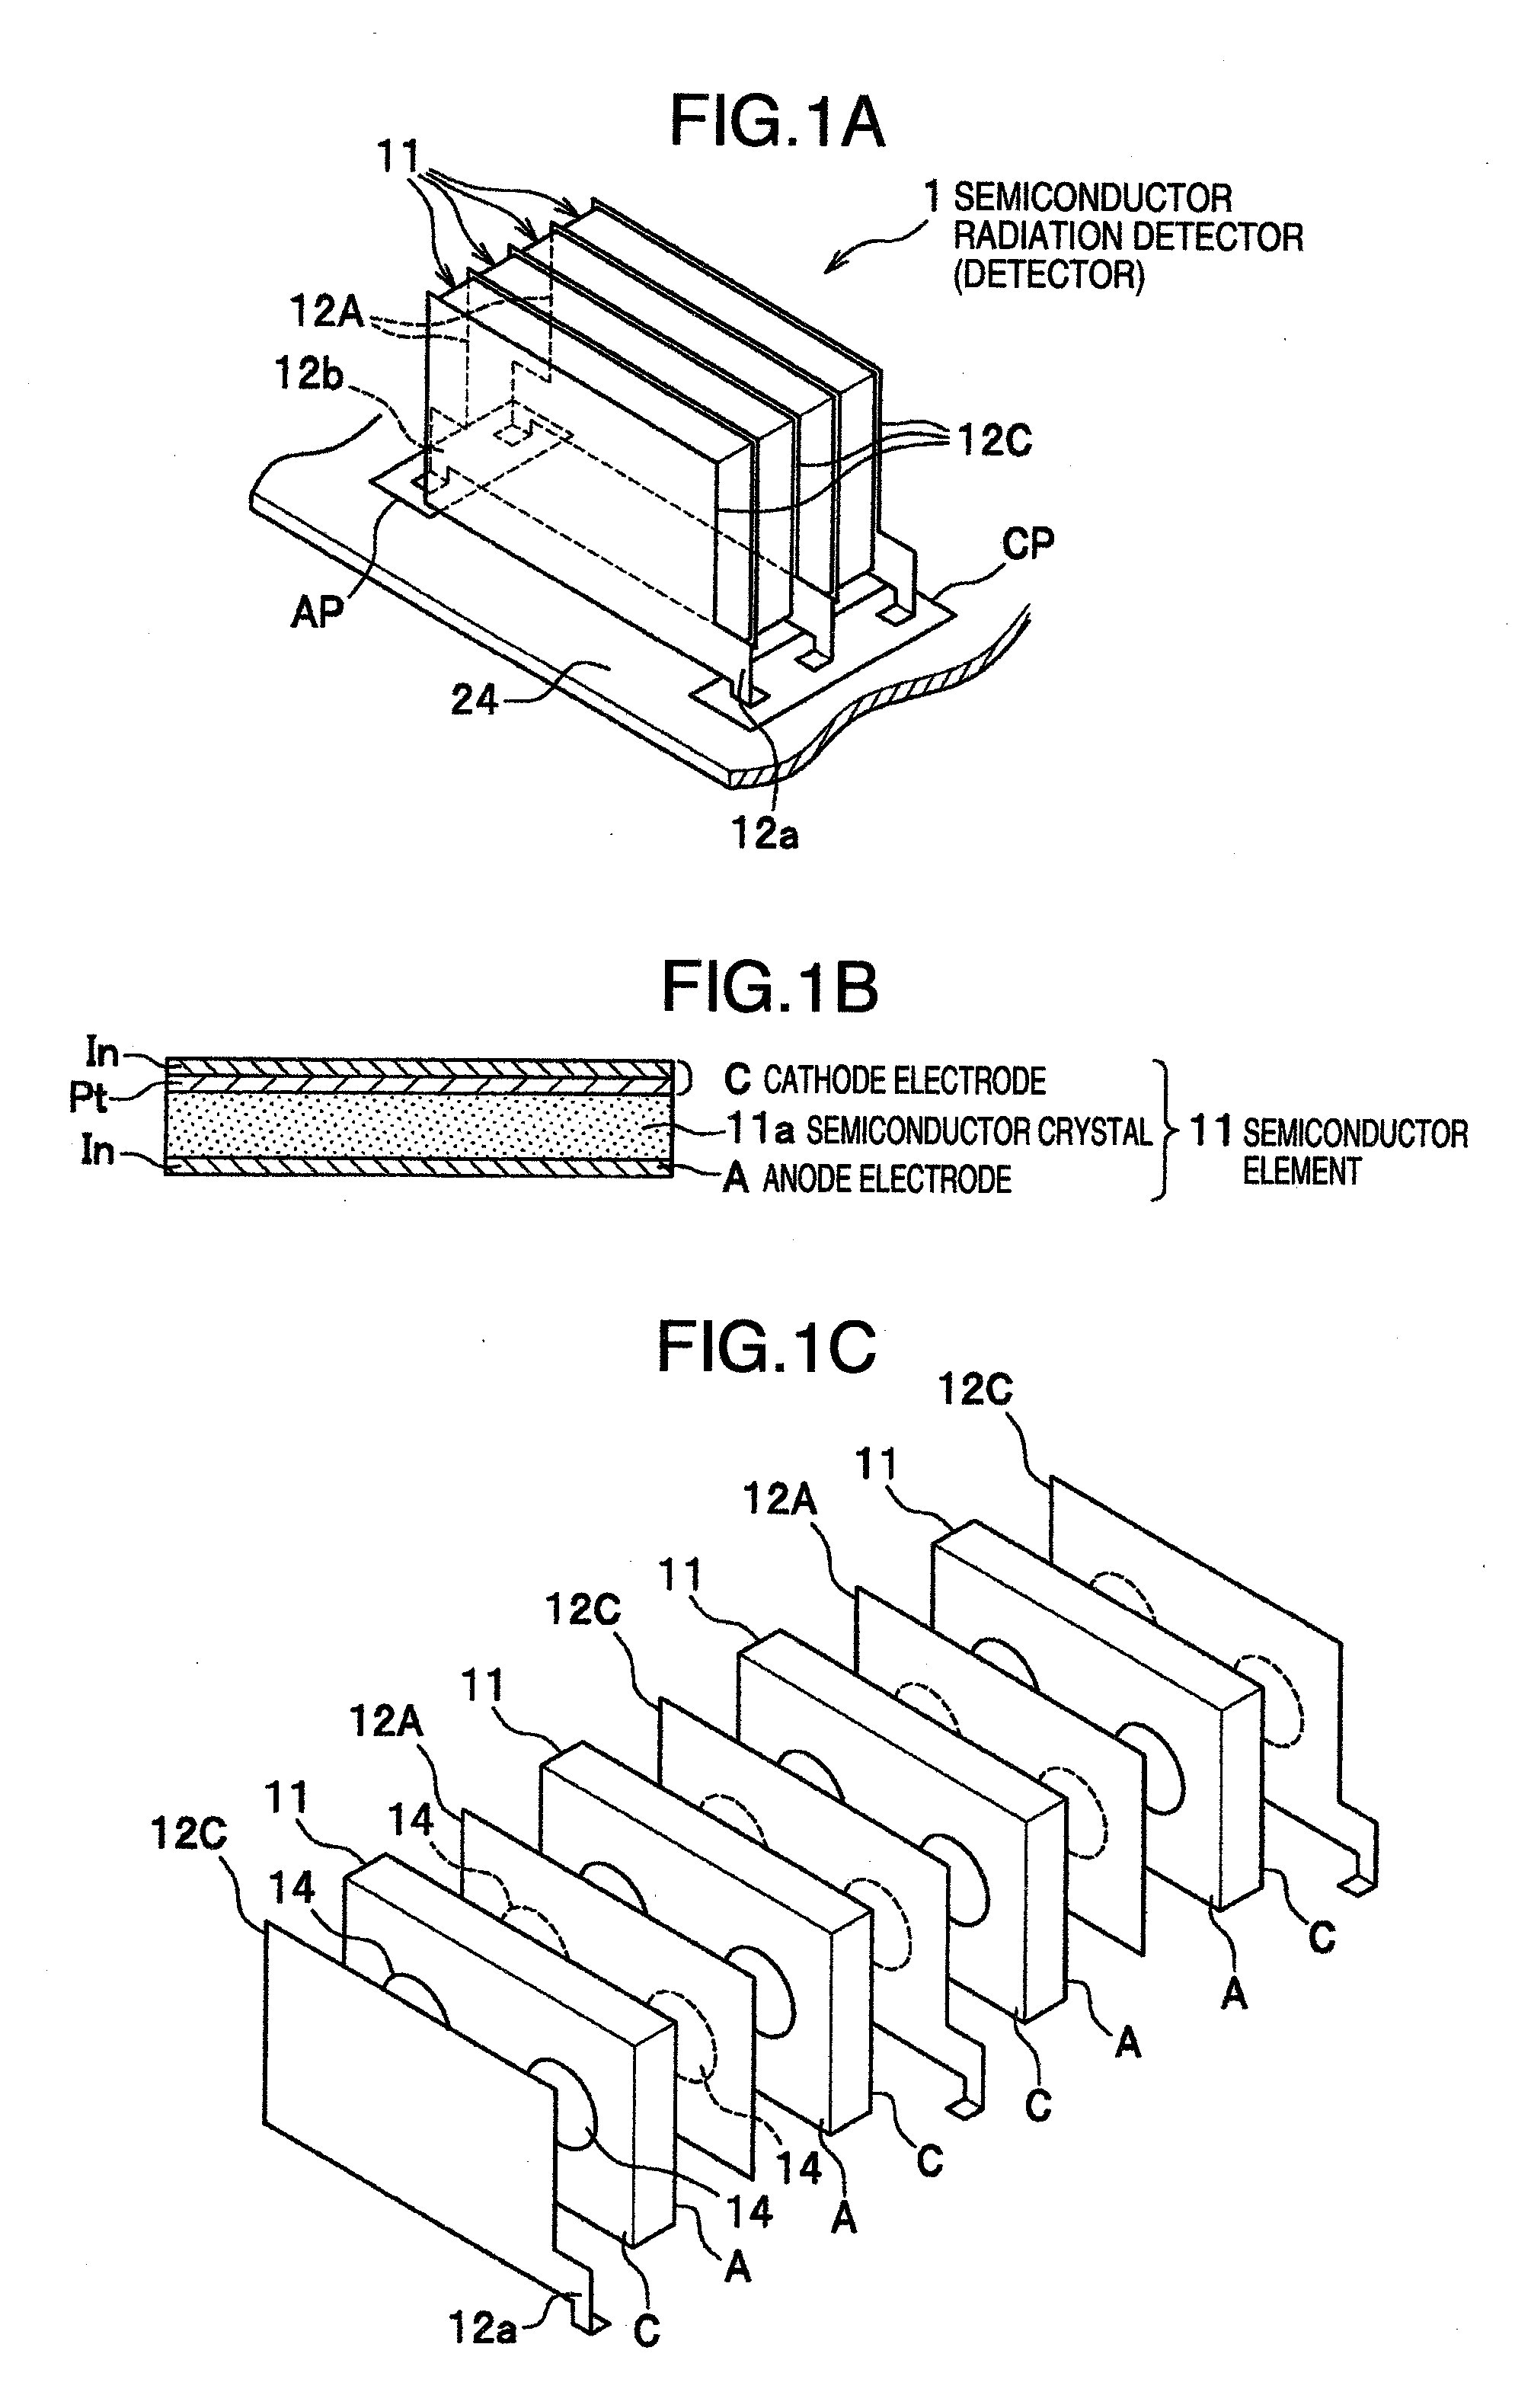 Semiconductor radiation detector and radiation detection equipment